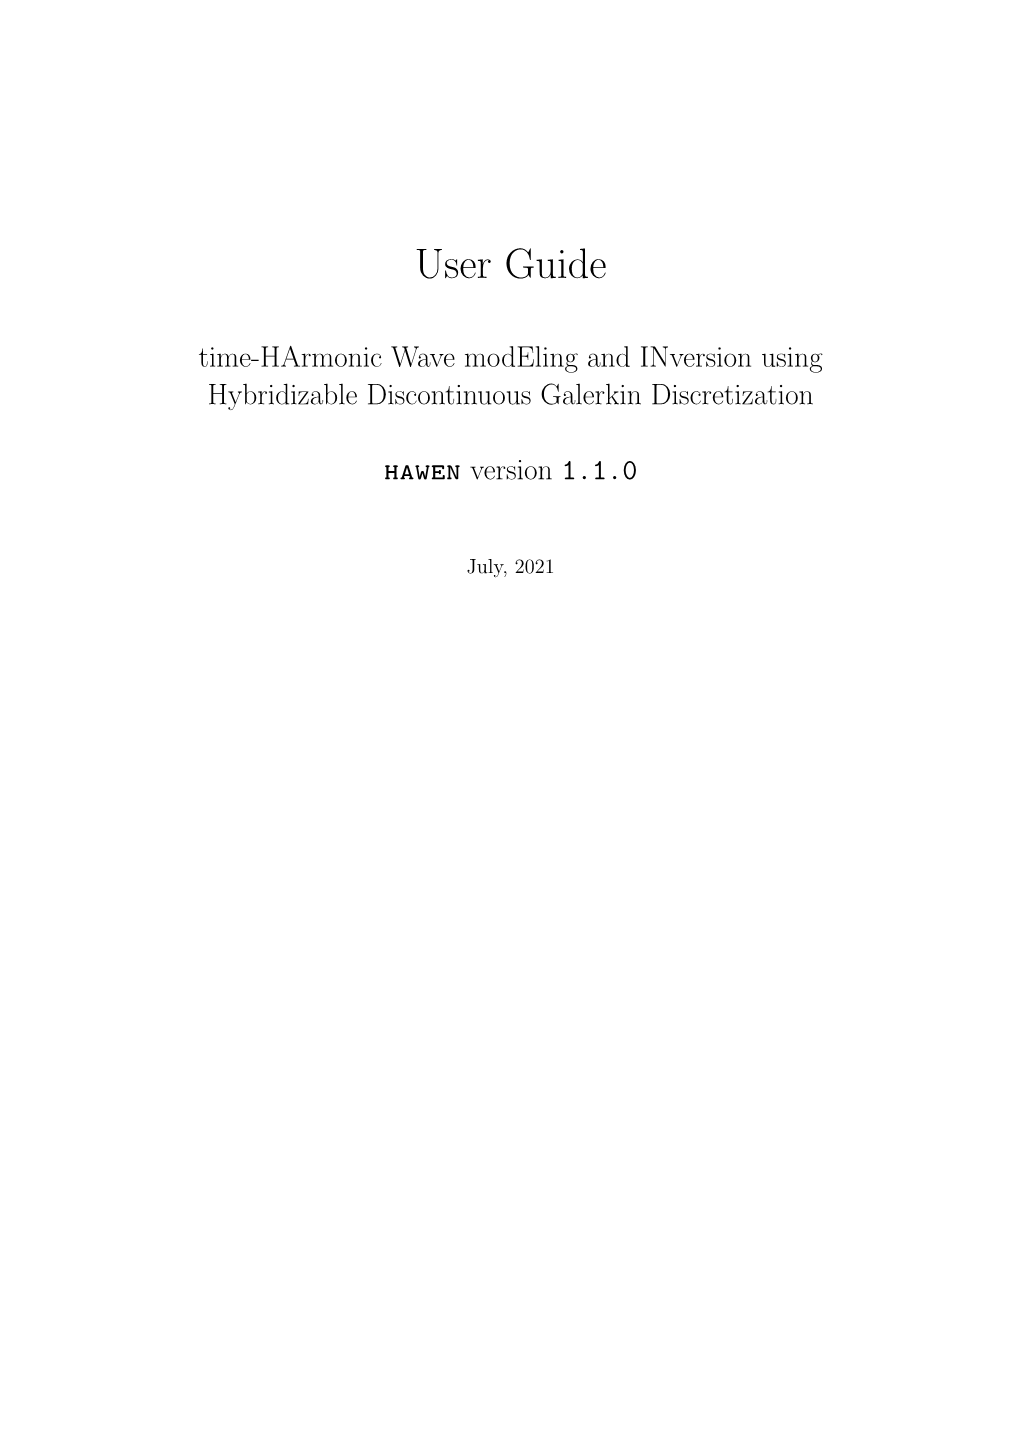 User Guide Time-Harmonic Wave Modeling and Inversion Using Hybridizable Discontinuous Galerkin Discretization